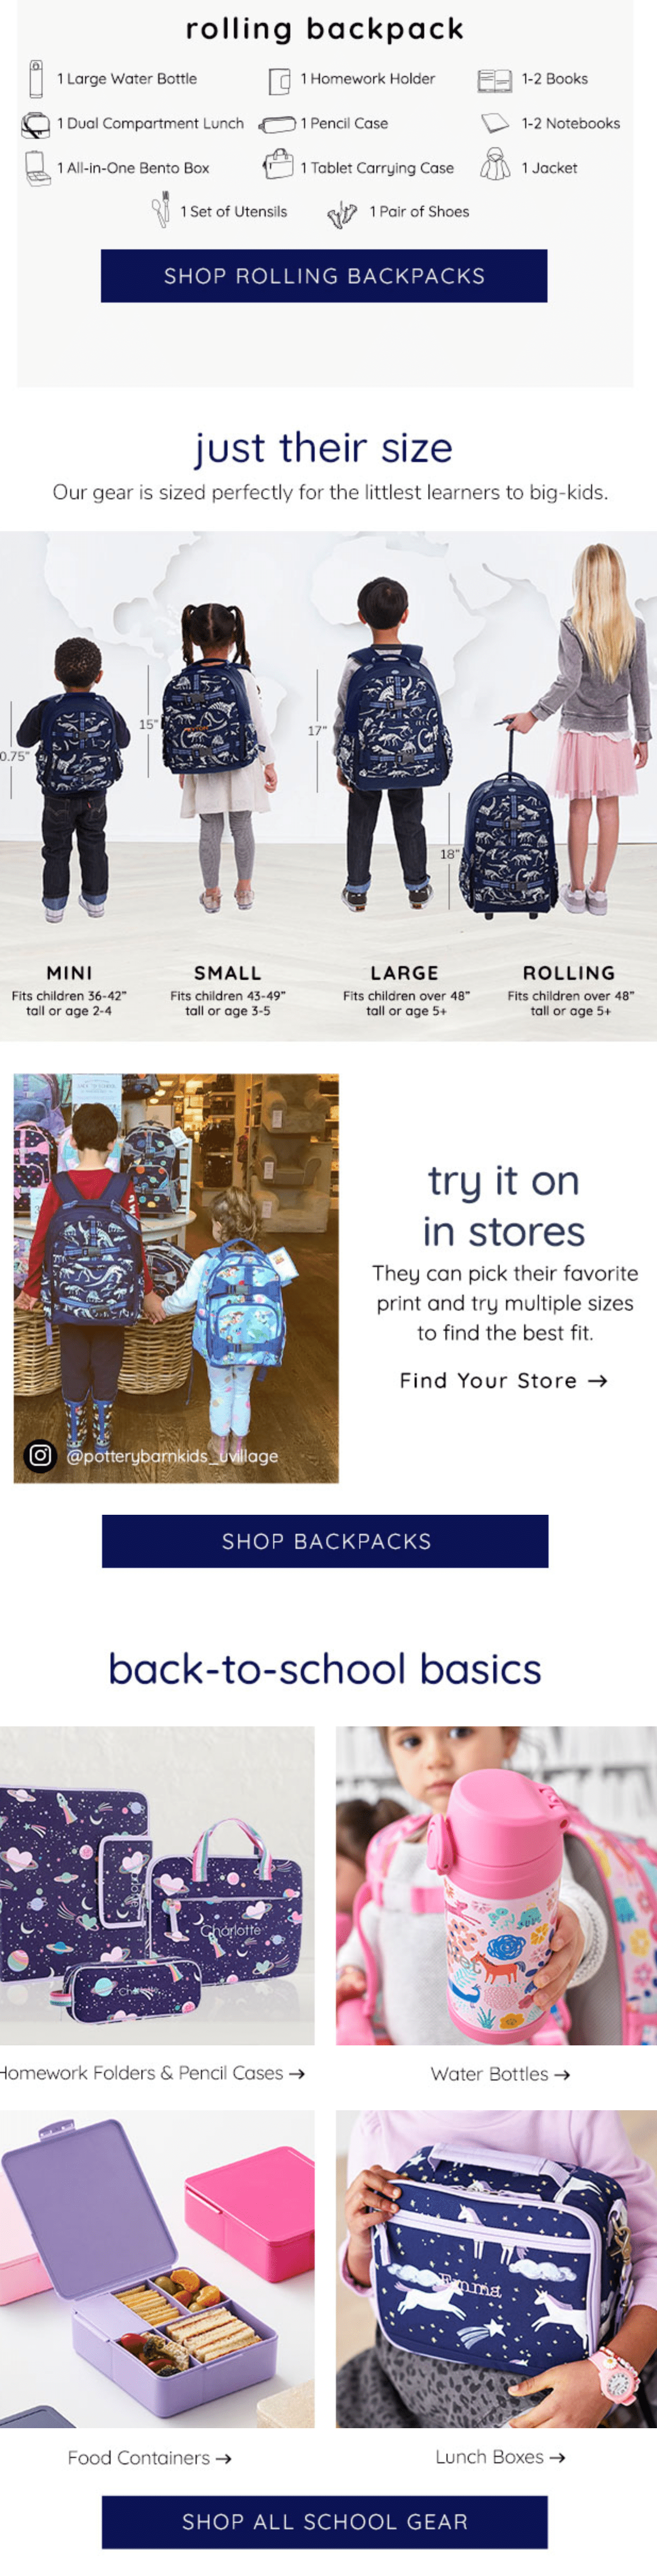 Pottery Barn Kids email